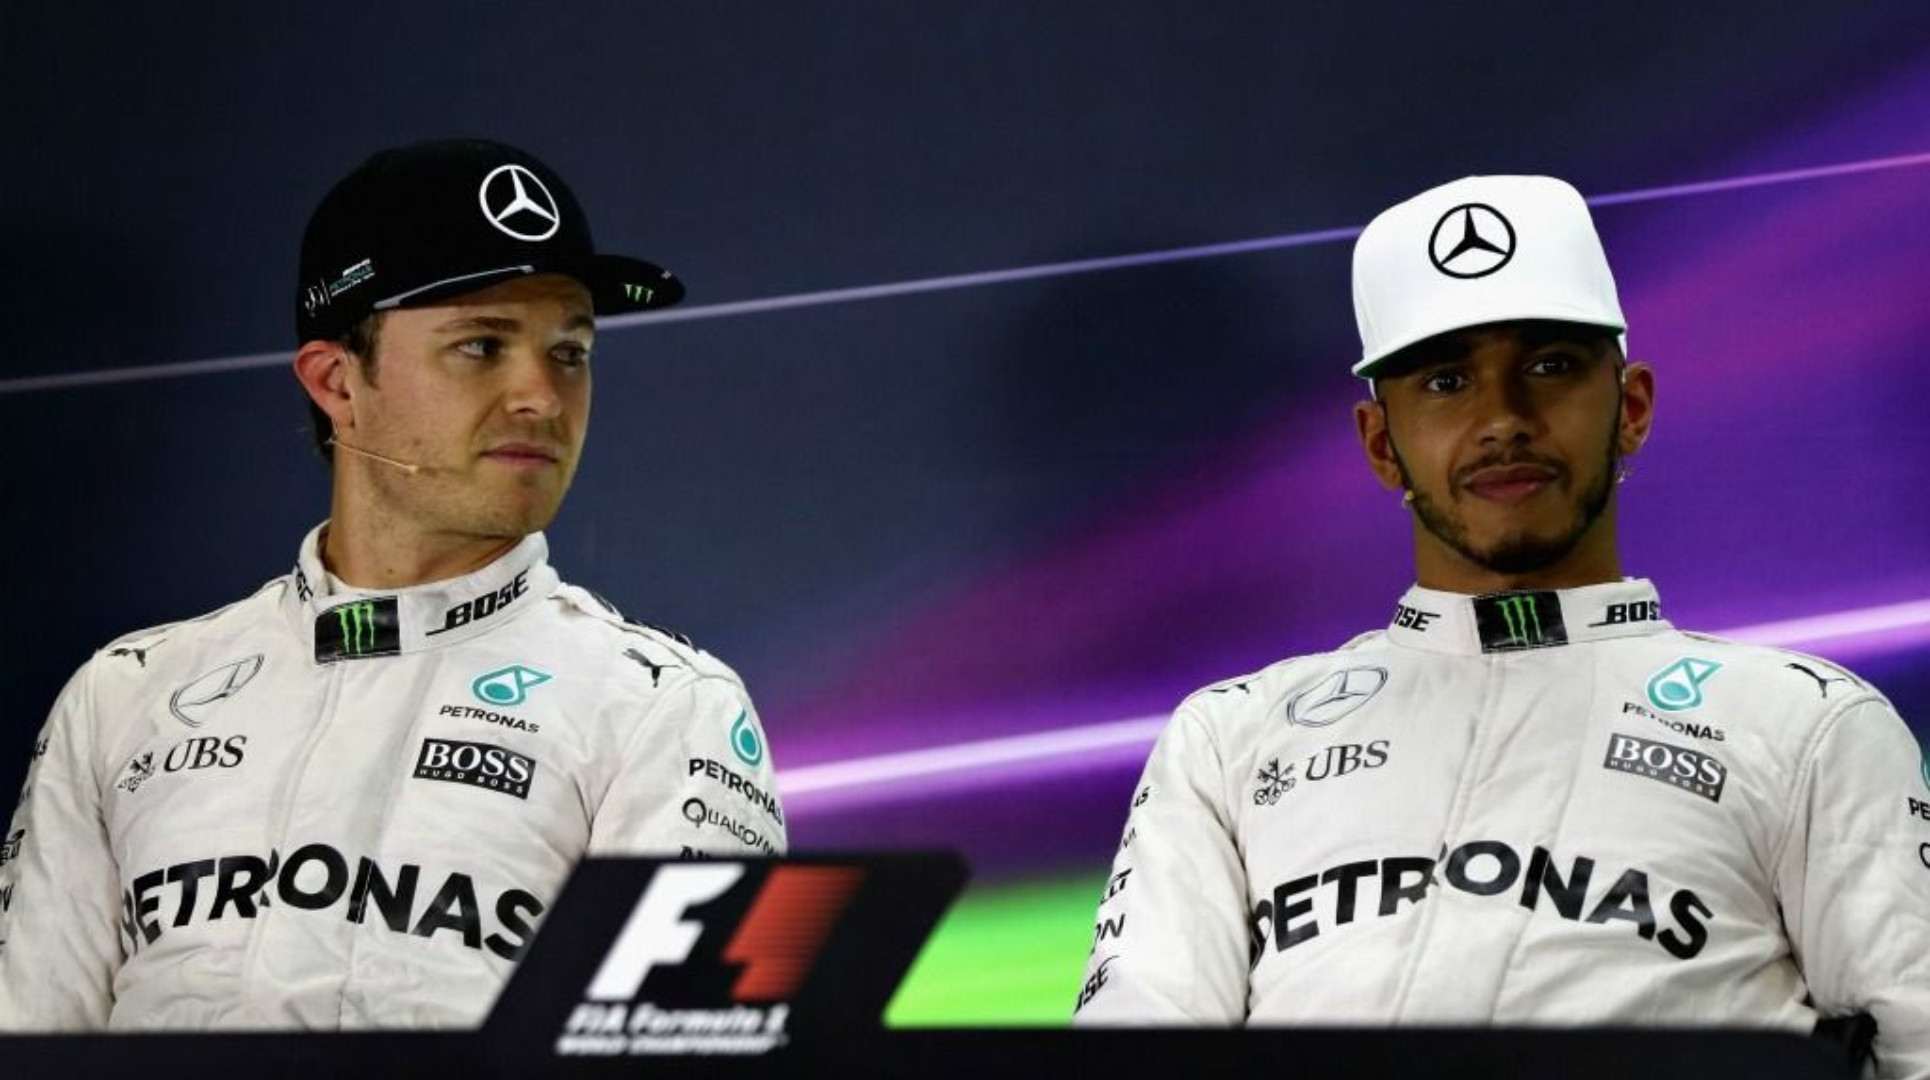 Lewis Hamilton and Nico Rosberg in a file photo. (Image credit: Twitter)